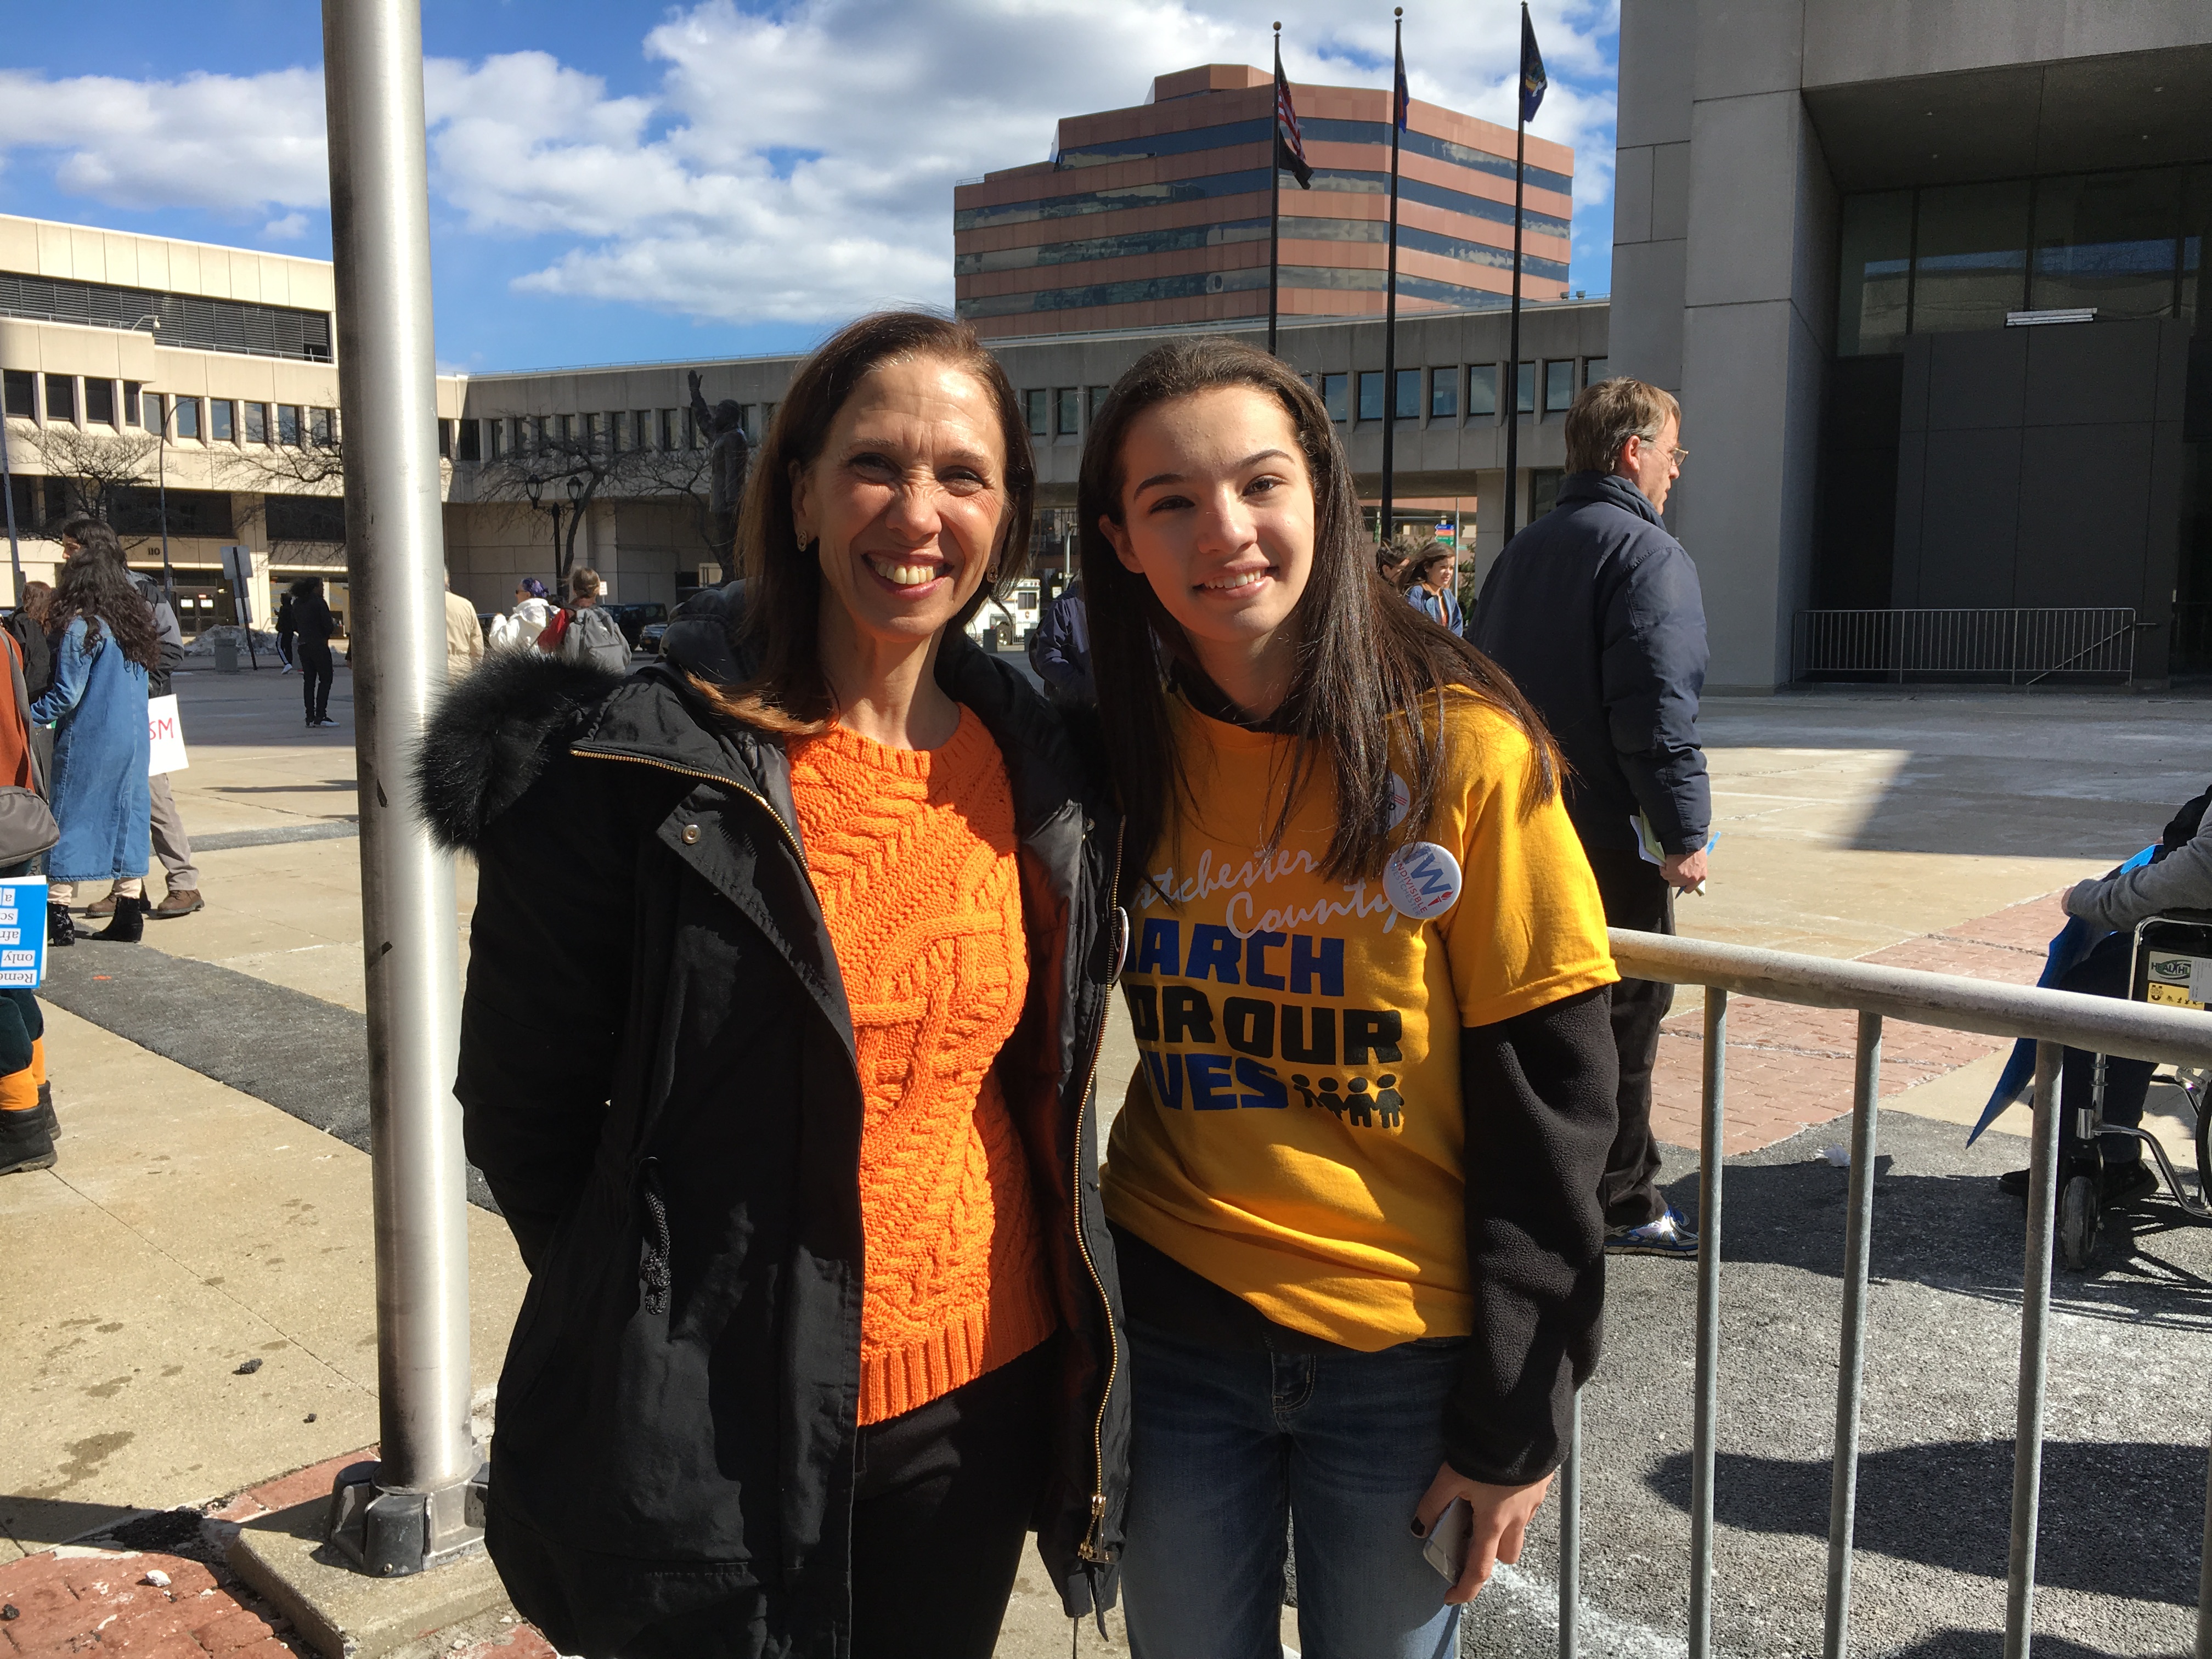 Assemblymember Amy Paulin with White Plains High School student Kelly Marx at the conclusion of the Westchester March for Our Lives in White Plains on March 24, 2018.  Kelly was one of the lead organi